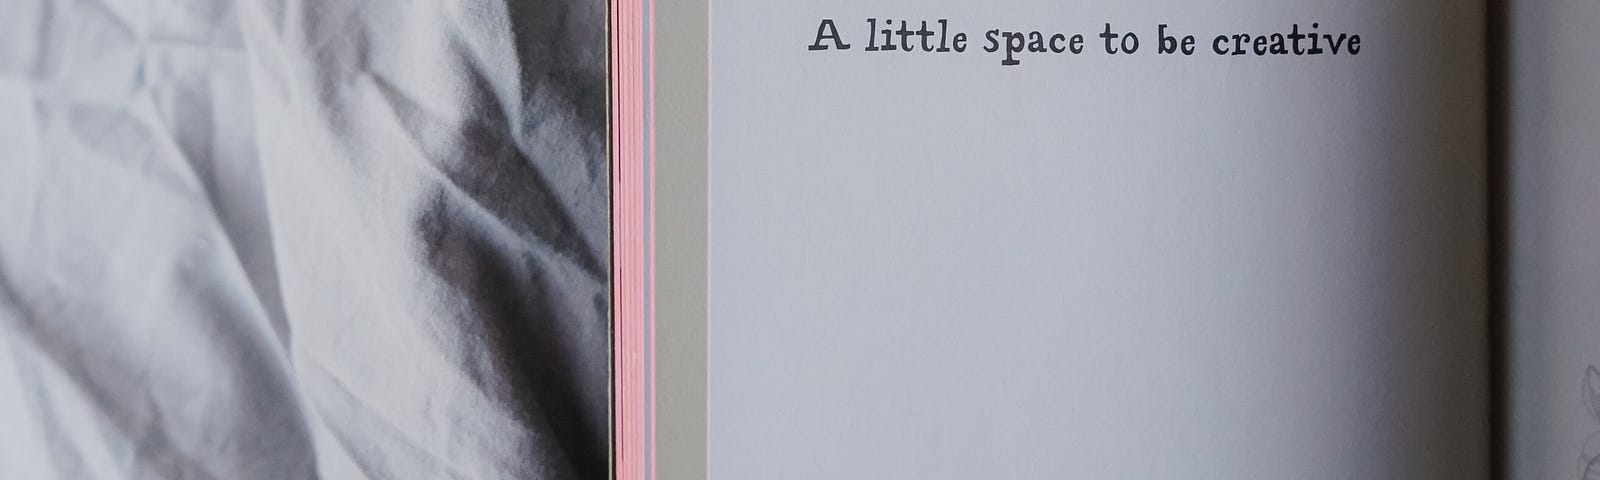 Photo of an open blank journal with text reading, “A little space to be creative”